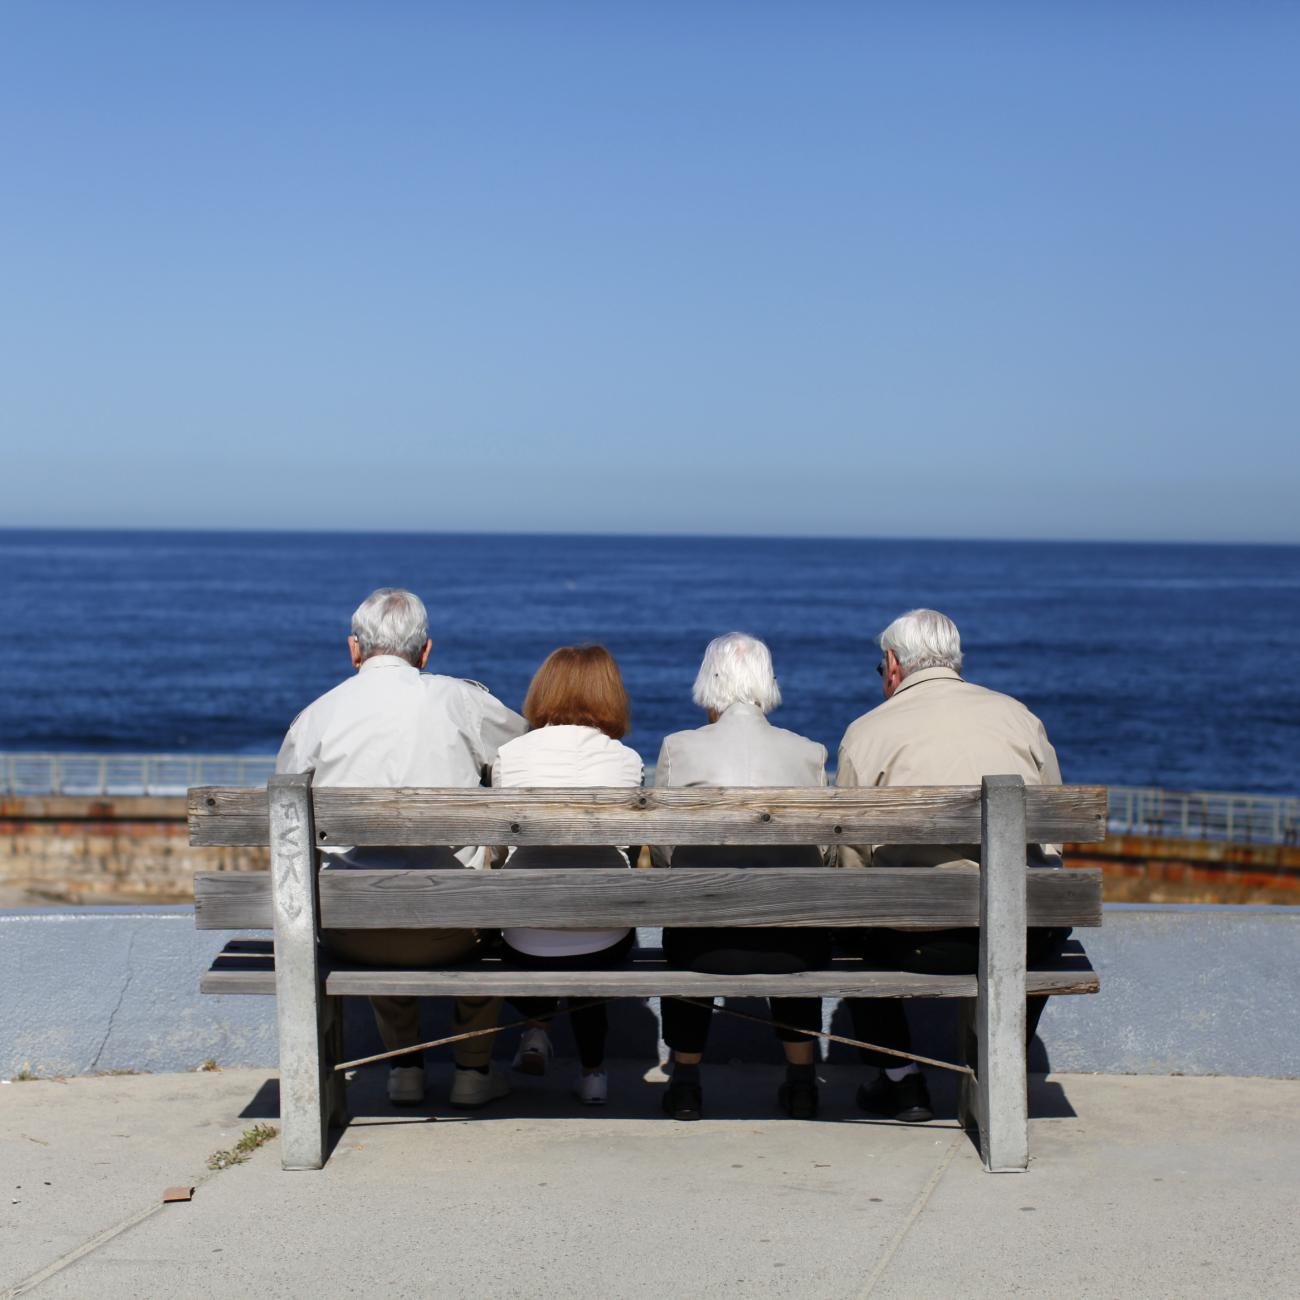 A pair of elderly couples view the ocean and waves along the beach.